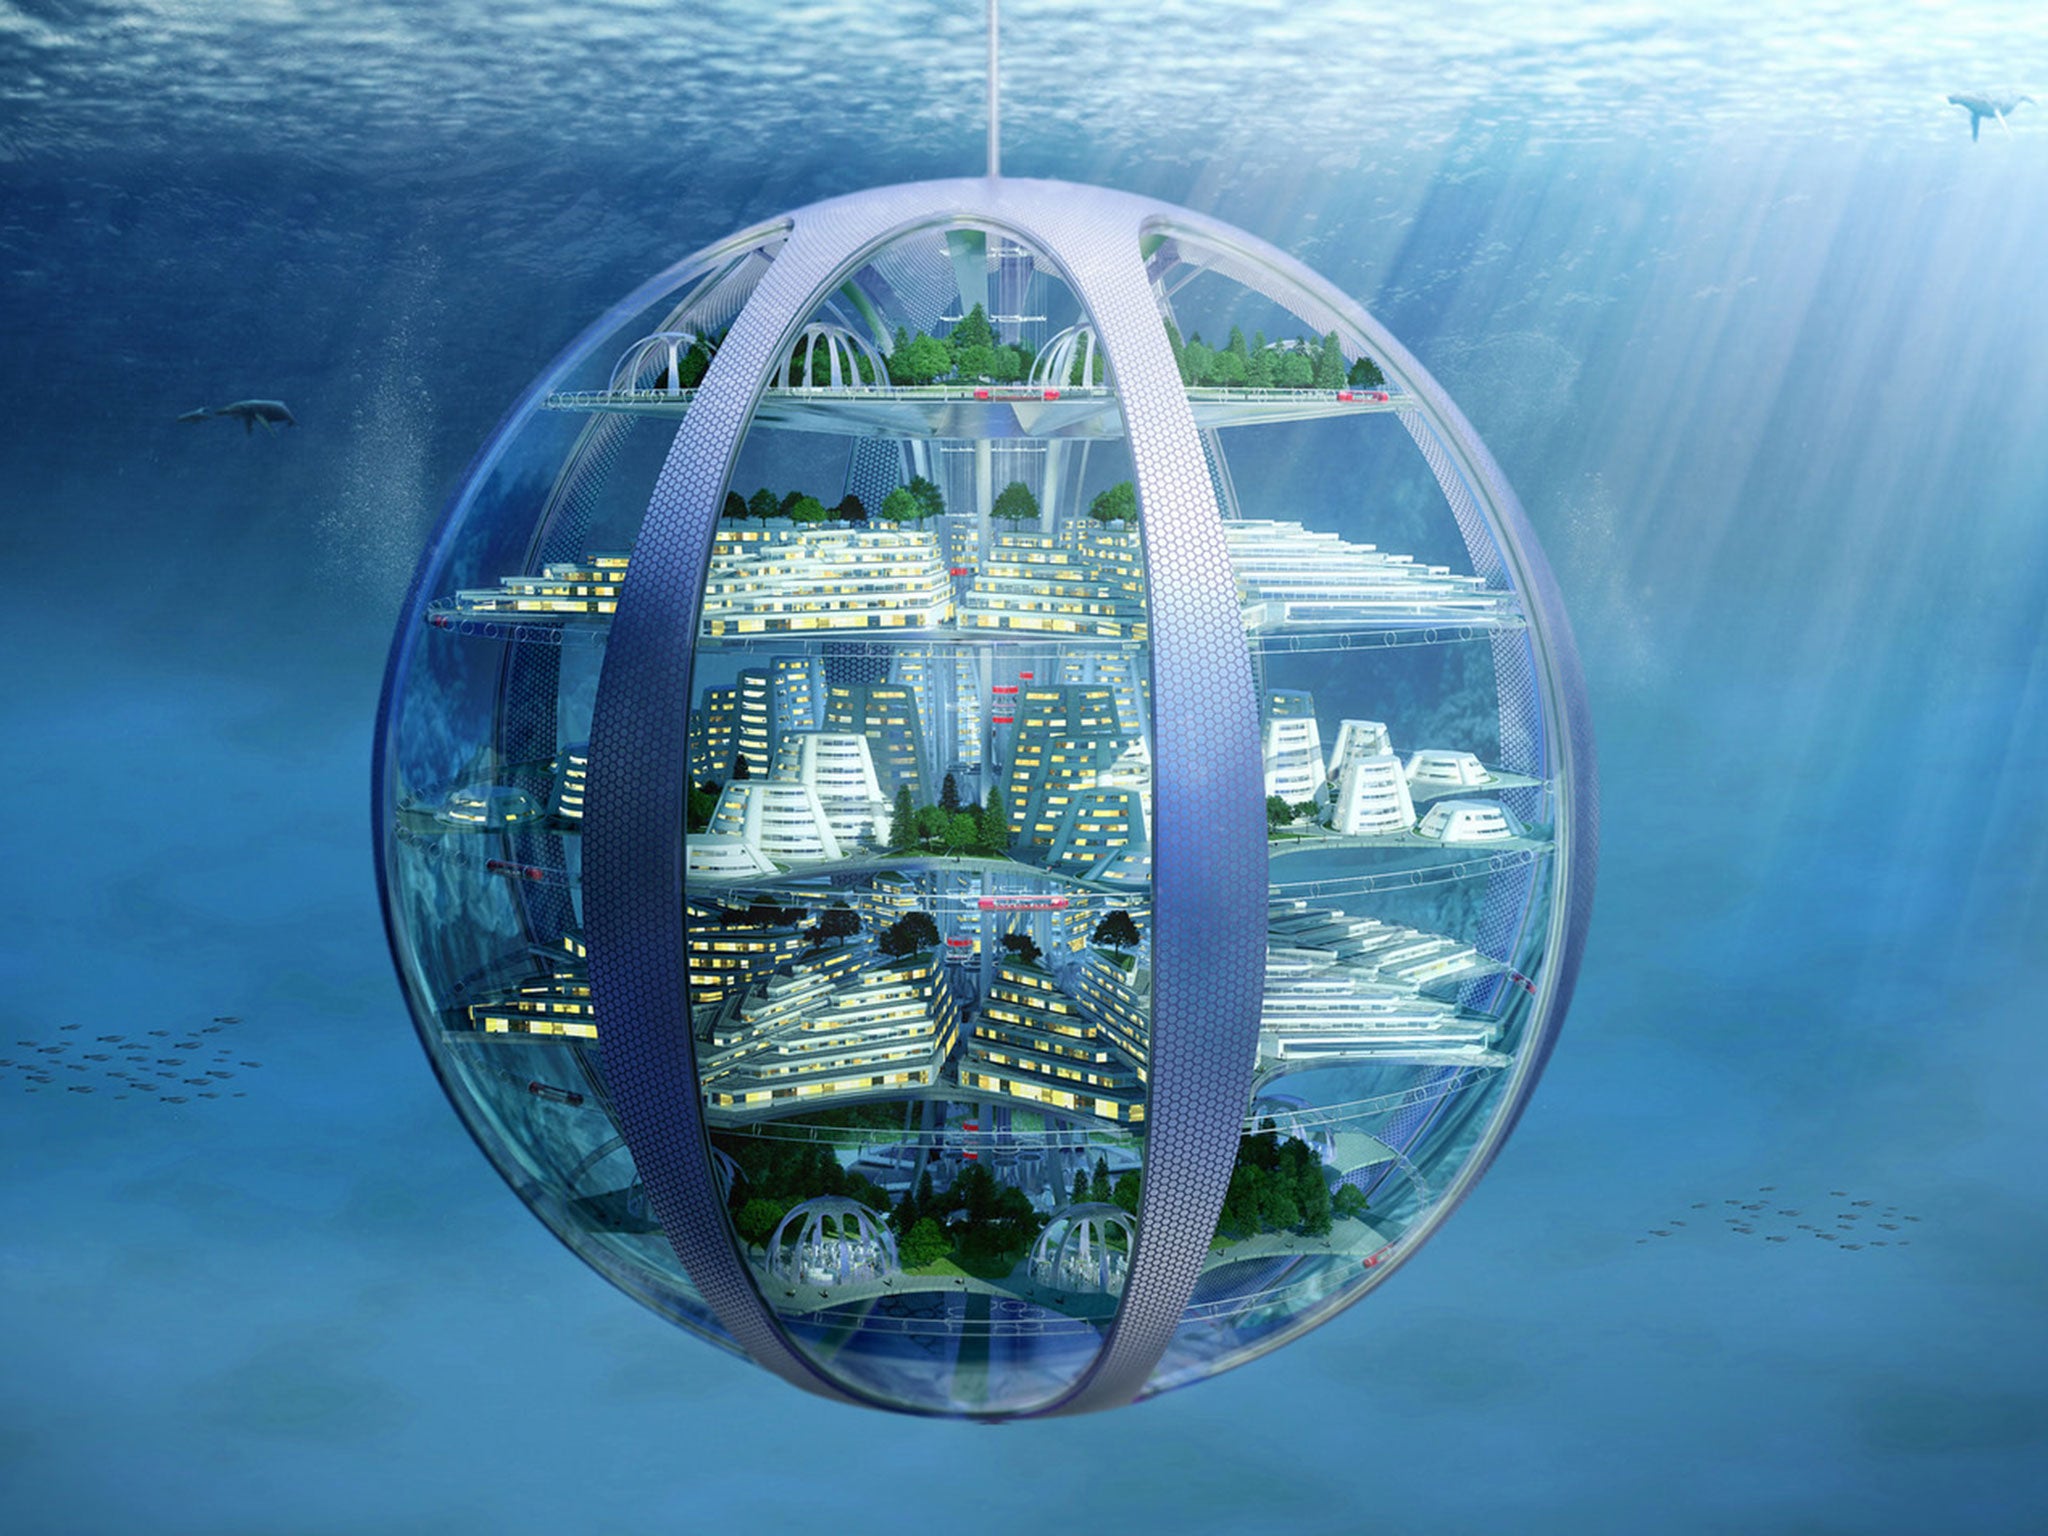 An underwater city in 2116 from the SmartThings report